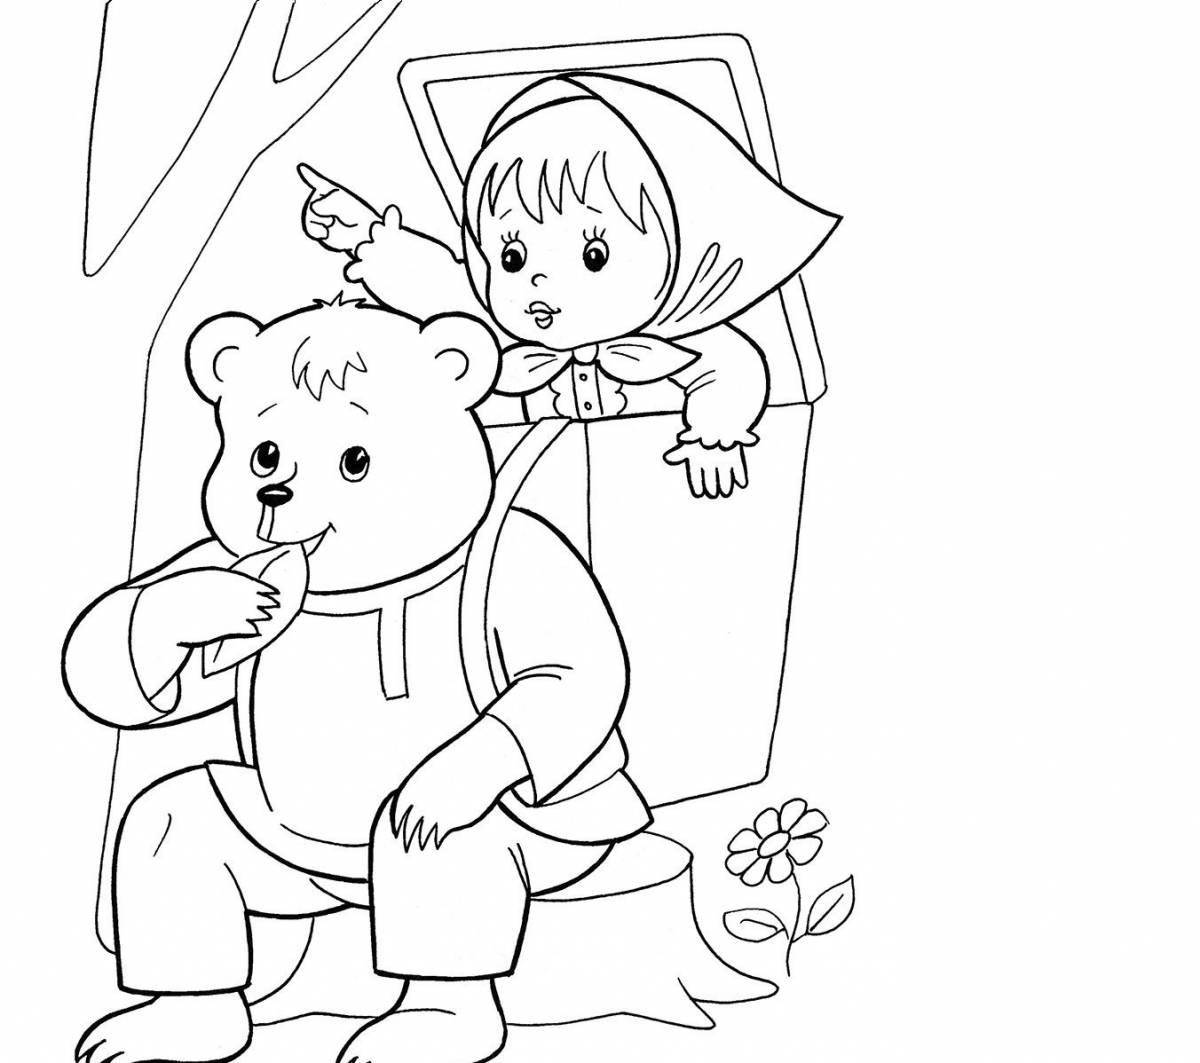 Playful coloring for children 3-4 years old Russian folk tales